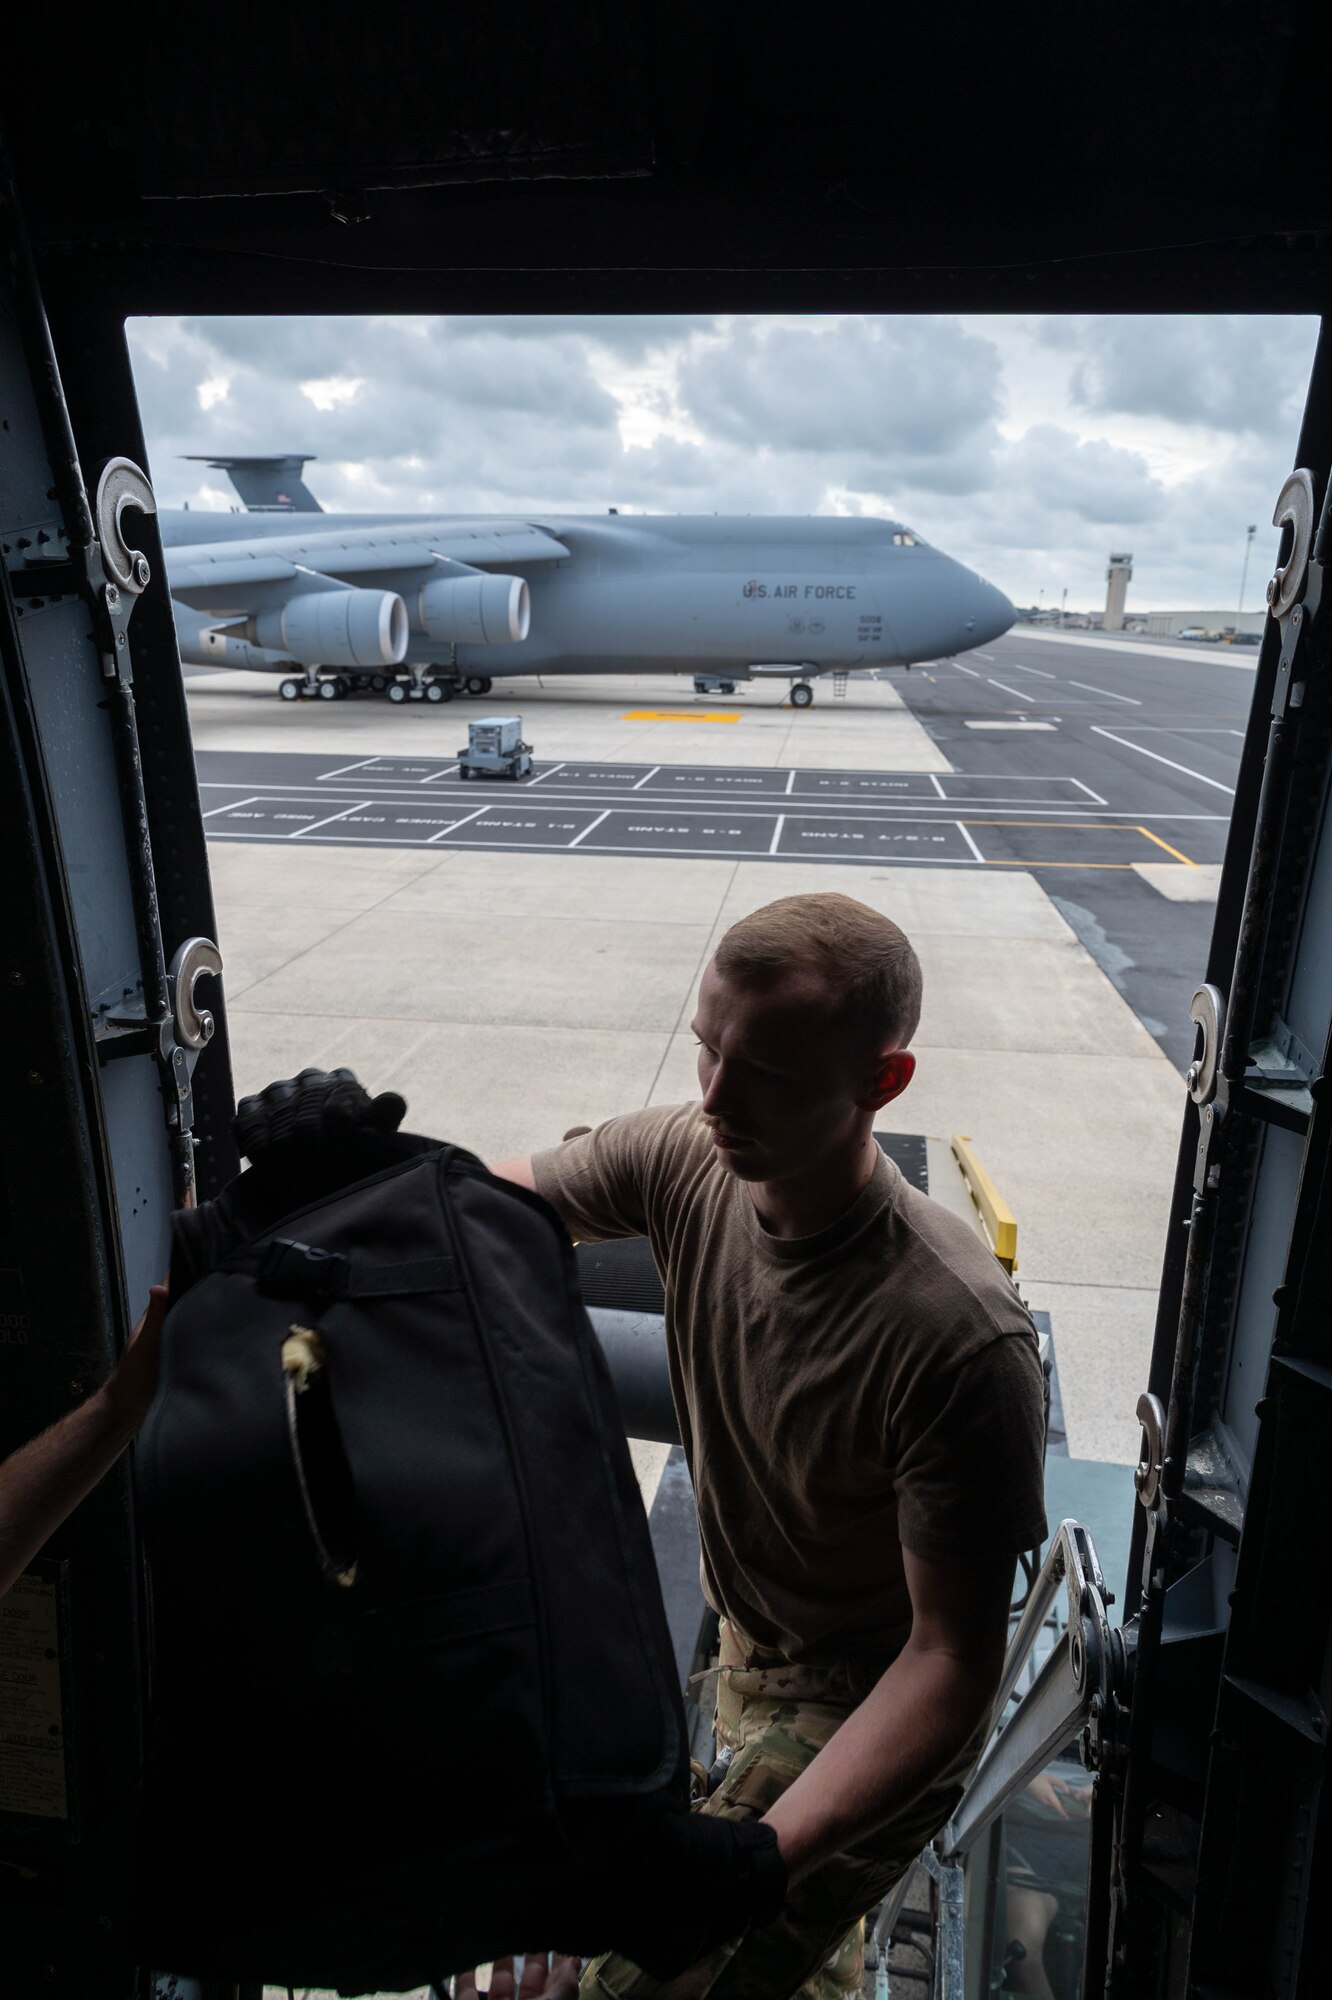 Staff Sgt. Hunter Barron, 9th Airlift Squadron loadmaster, loads luggage into a C-5M Super Galaxy before takeoff to Hamid Karzai International Airport, Afghanistan from Dover Air Force Base, Delaware, Aug. 16, 2021. Air Mobility Airmen play a key role in facilitating the safe departure and relocation of U.S. citizens, Special Immigration Visa recipients, and vulnerable Afghan populations from Afghanistan. (U.S. Air Force photo by Senior Airman Faith Schaefer)